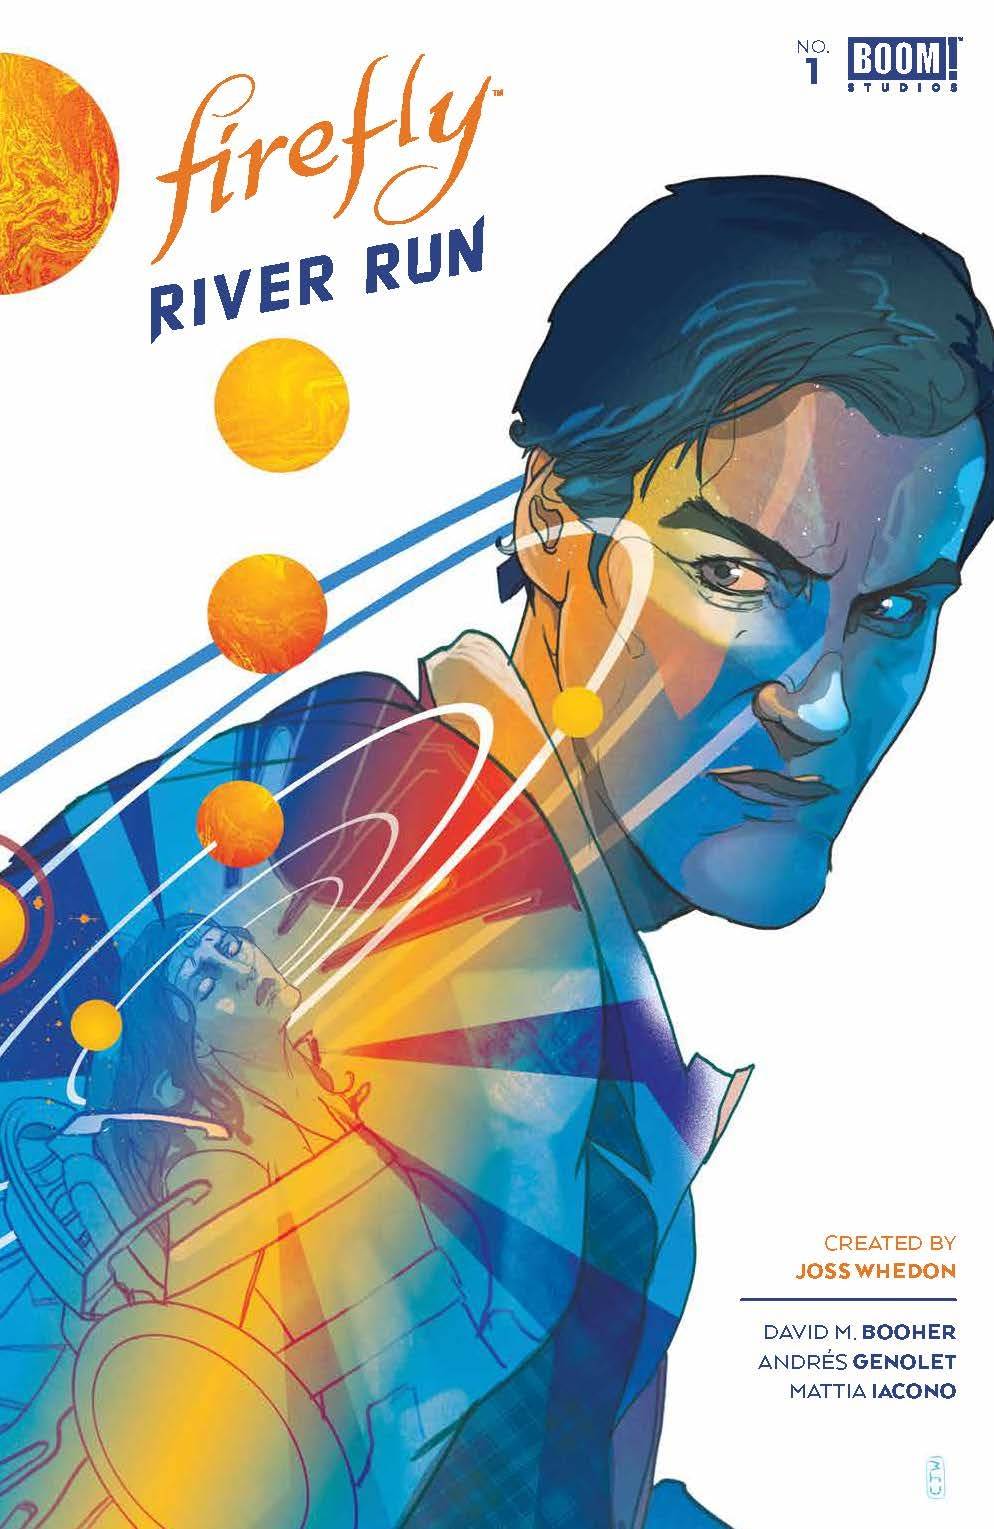 FIREFLY RIVER RUN #1 Cover